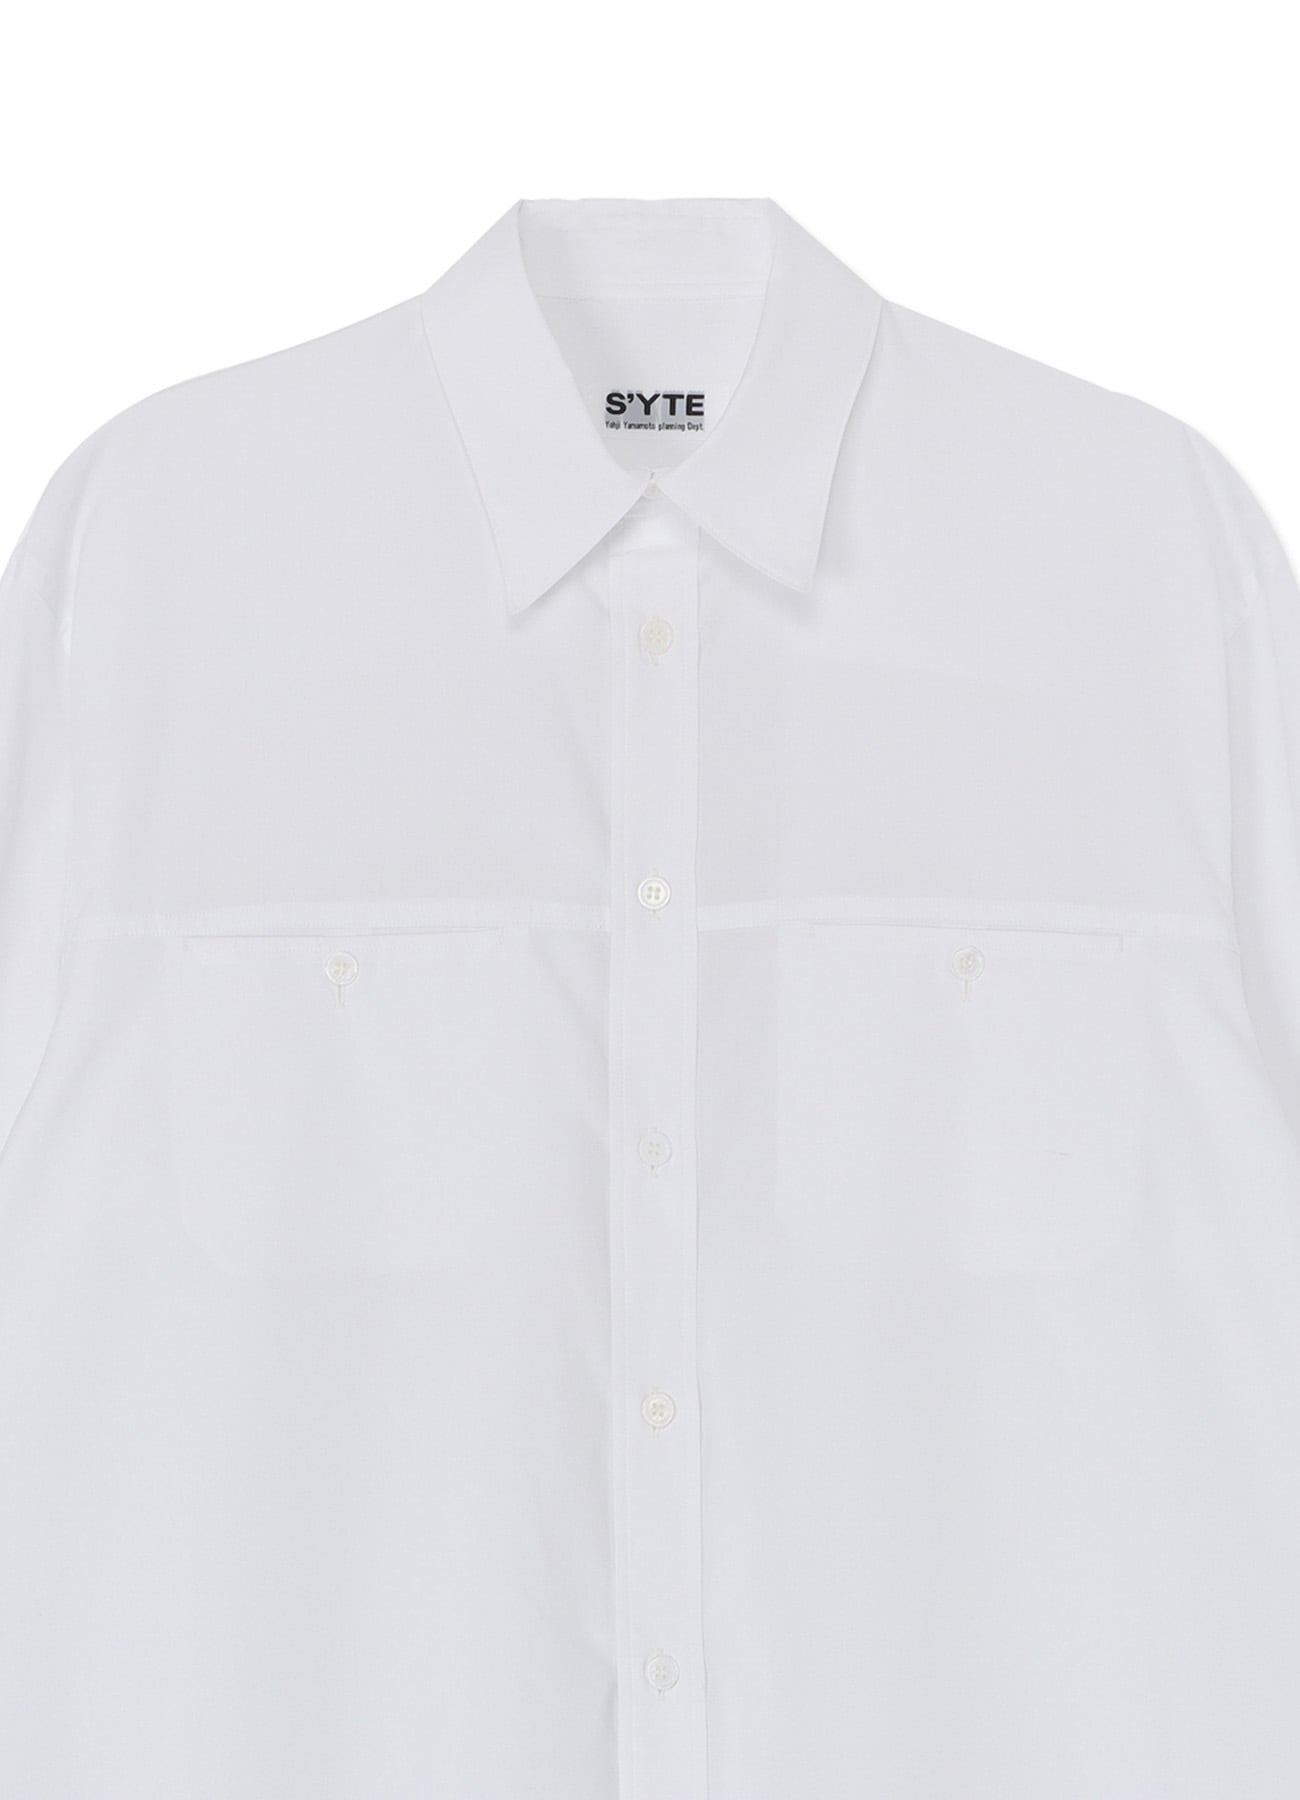 COTTON BROAD CLOTH SHIRT WITH BACK DRAPE DETAIL